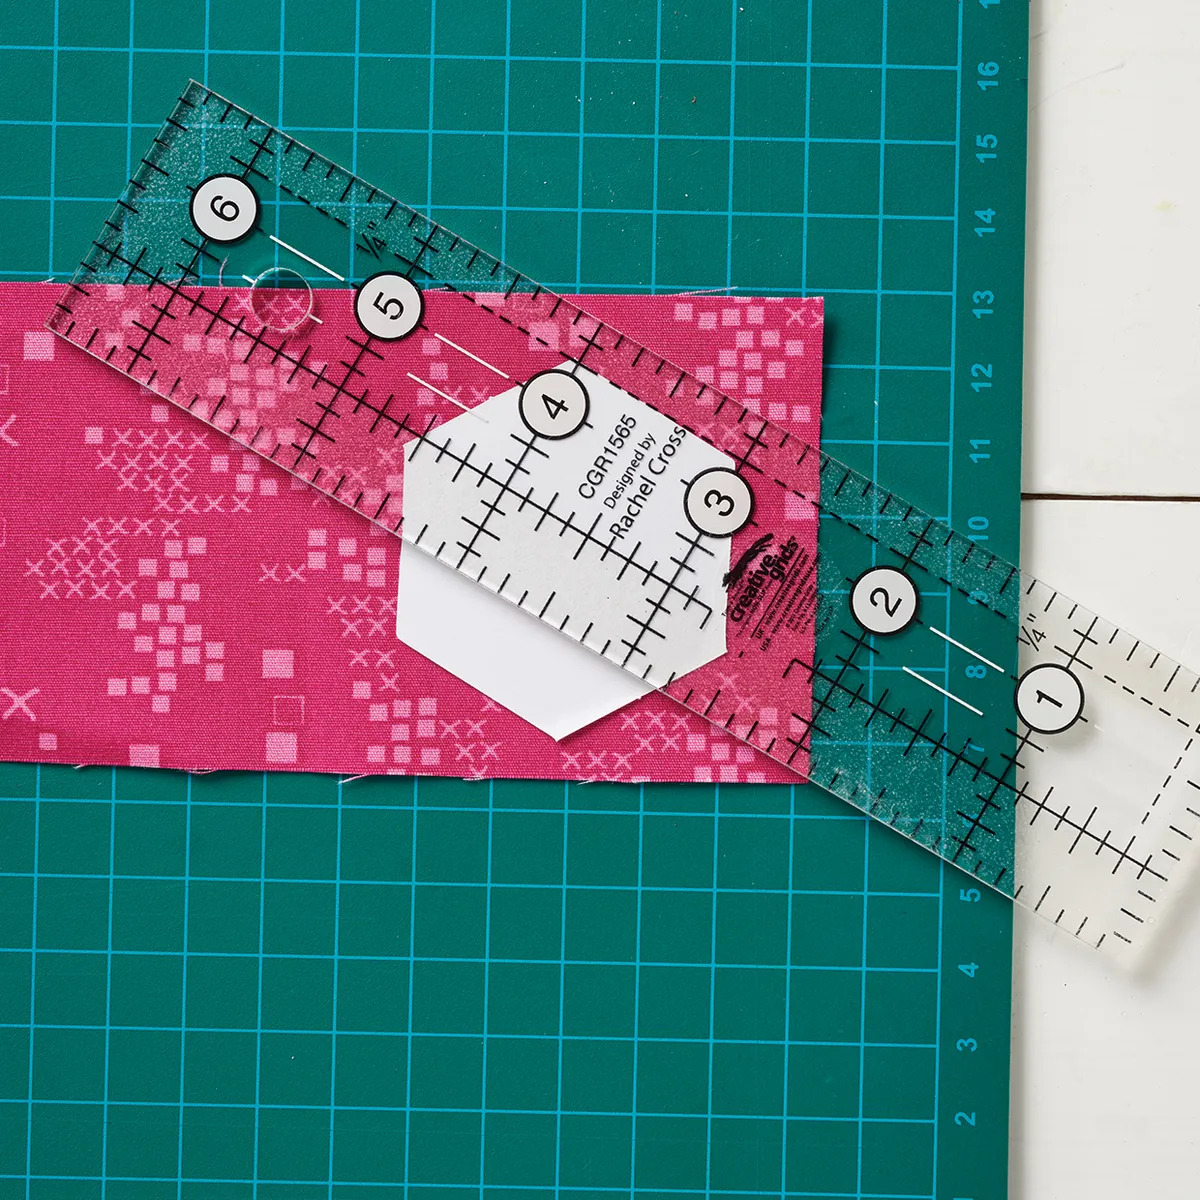 Using Quilt Templates and Specialty Rulers to Cut Fabric